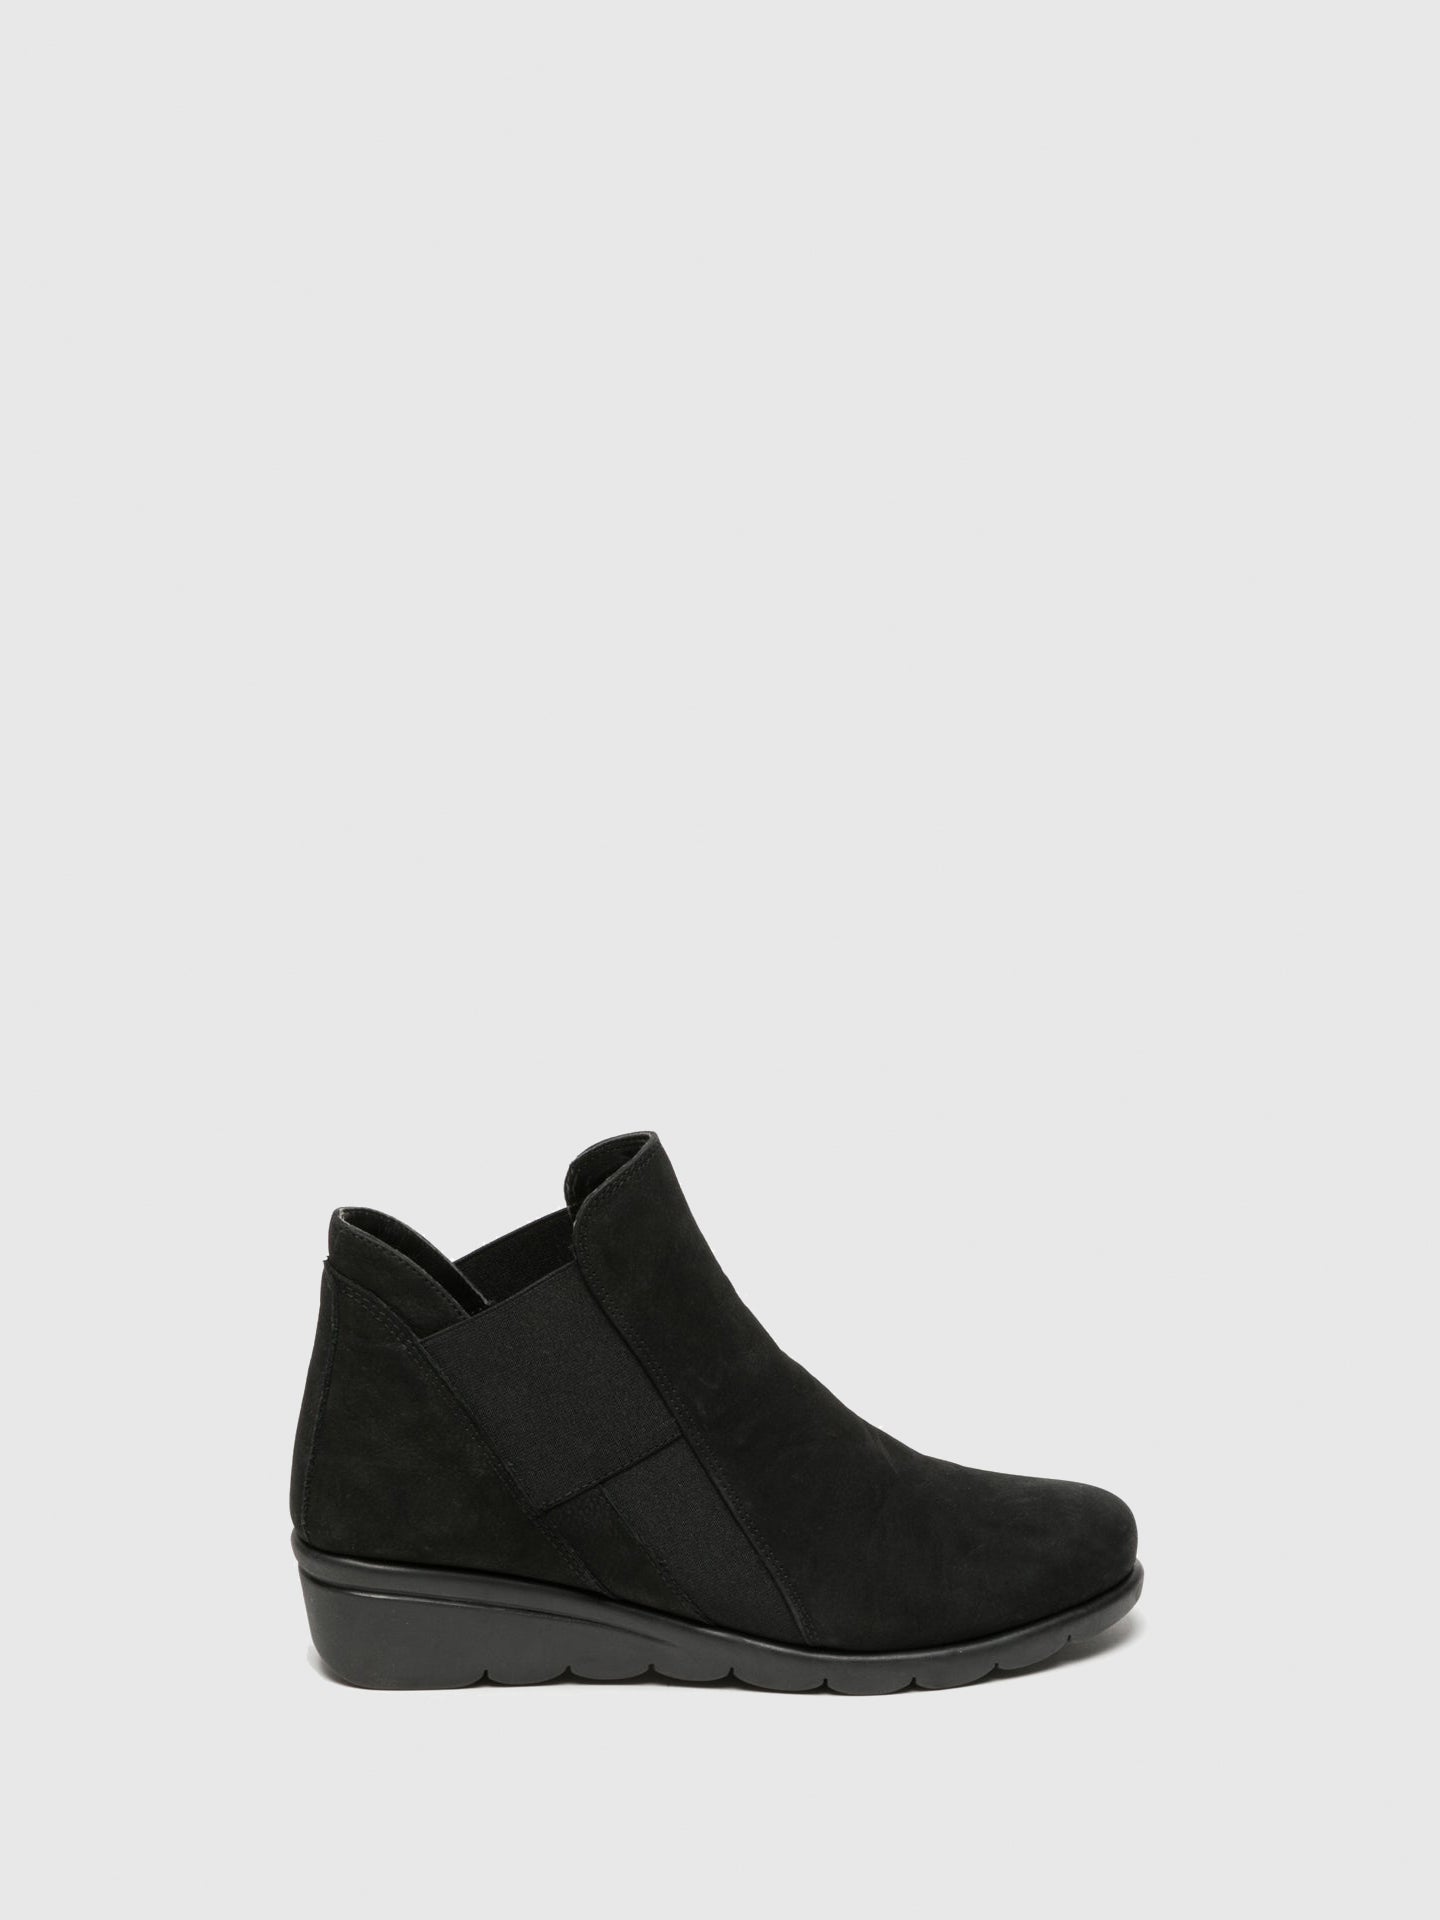 The Flexx Black Elasticated Ankle Boots